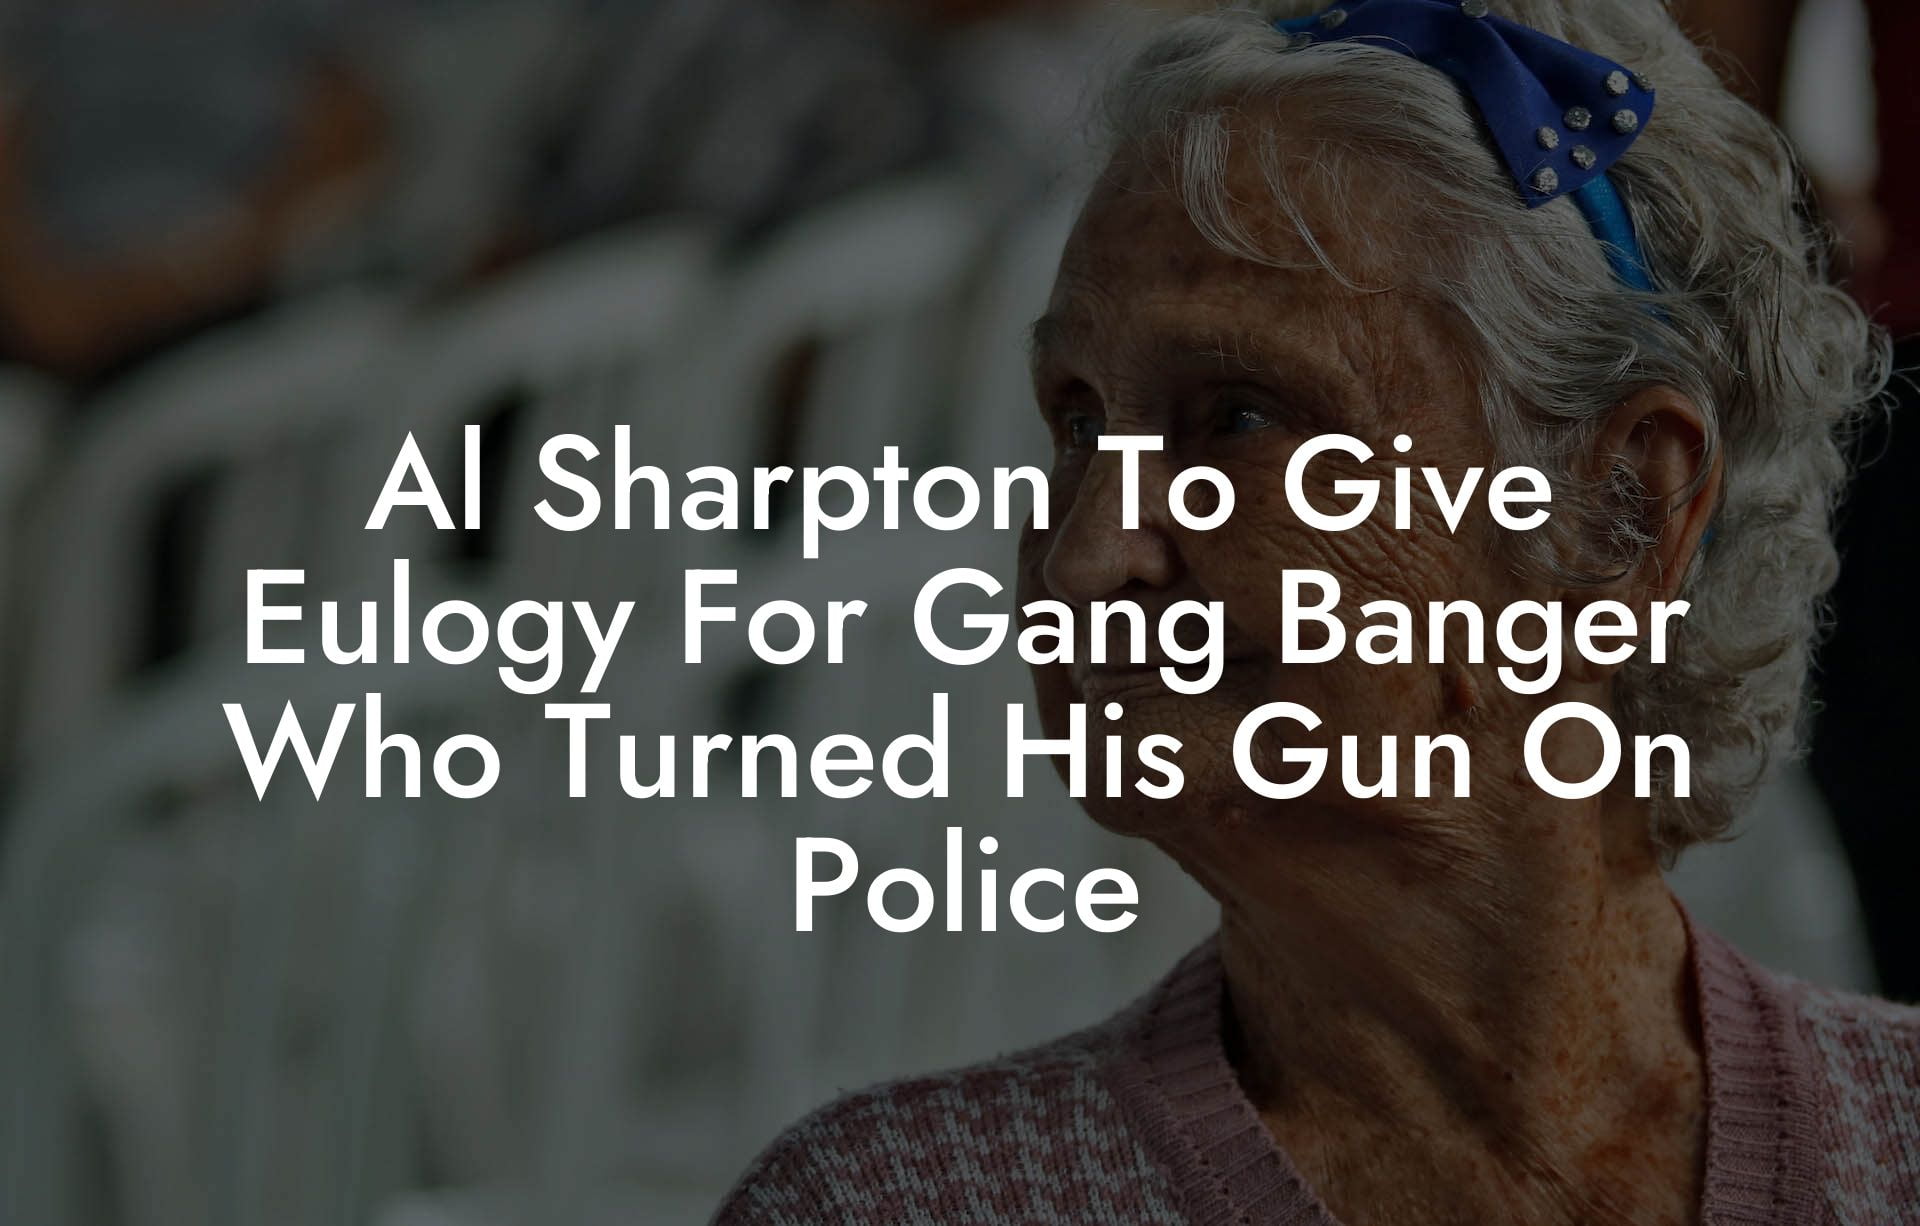 Al Sharpton To Give Eulogy For Gang Banger Who Turned His Gun On Police